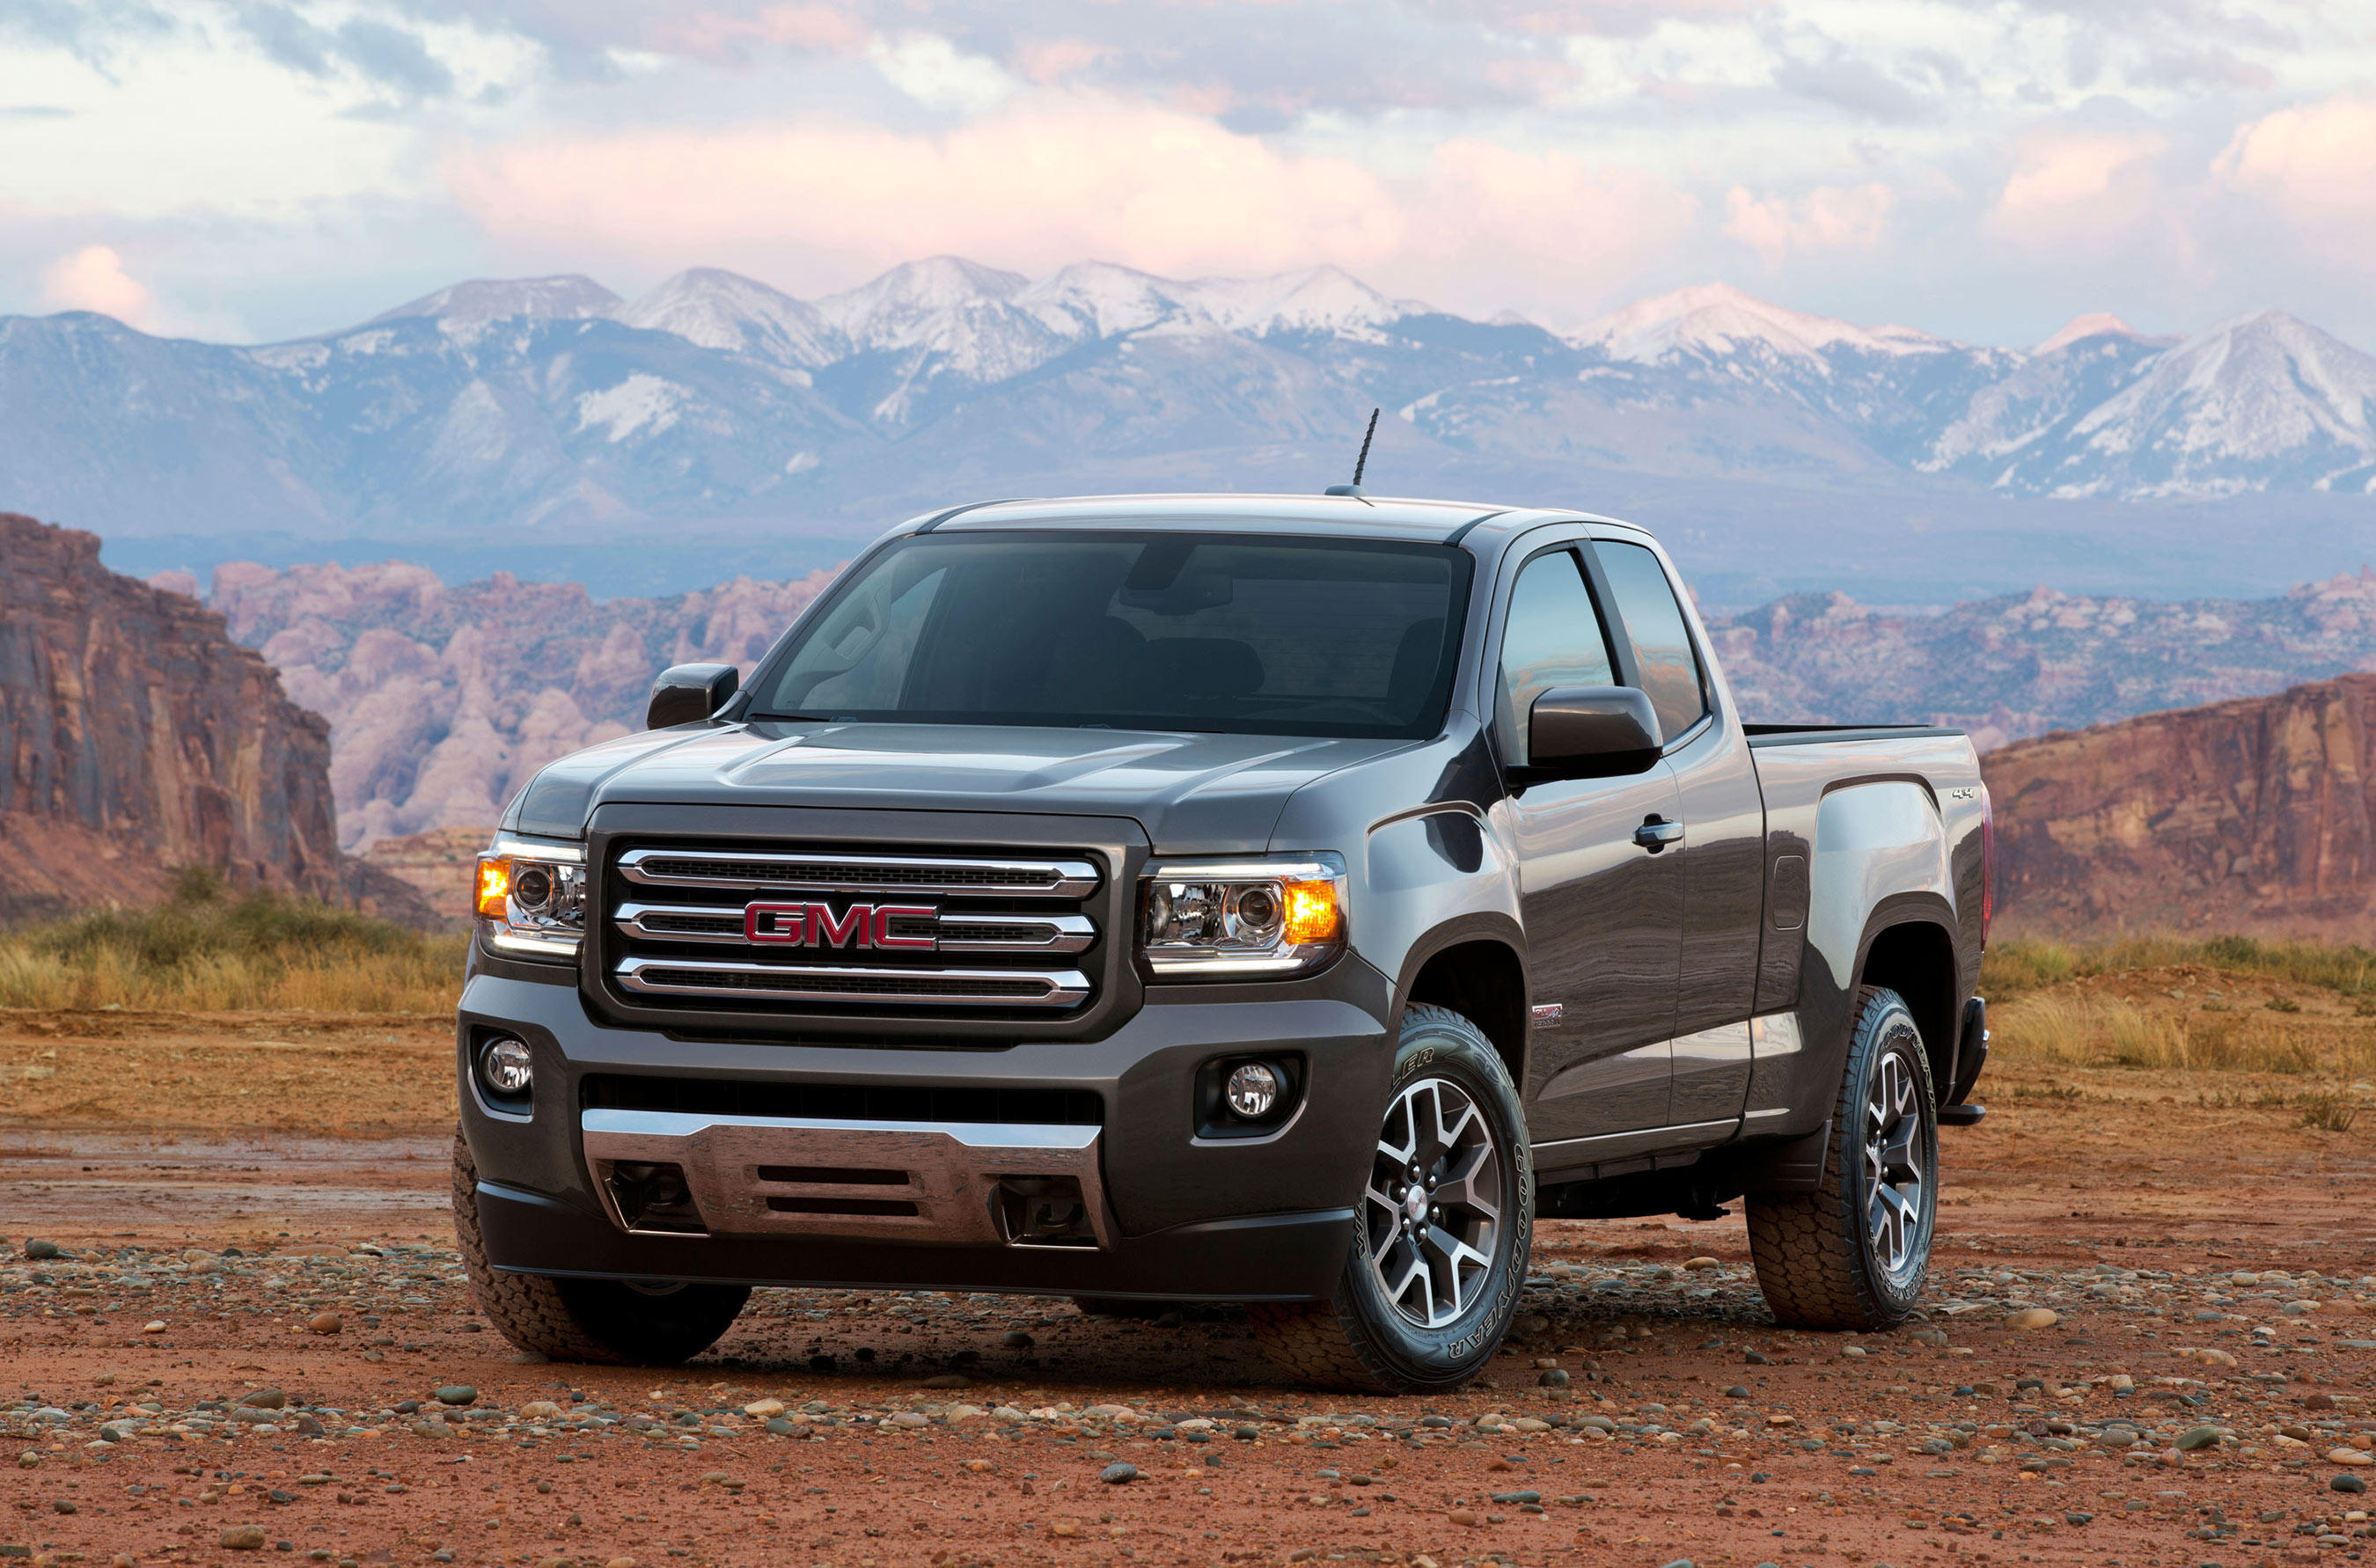 The 2015 GMC Canyon is a Kelley Blue Book Best Resale Value: Top 10 winner. A total of seven Chevrolet and GMC models are winning 2015 Best Resale Value Awards from Kelley Blue Book's KBB.com.